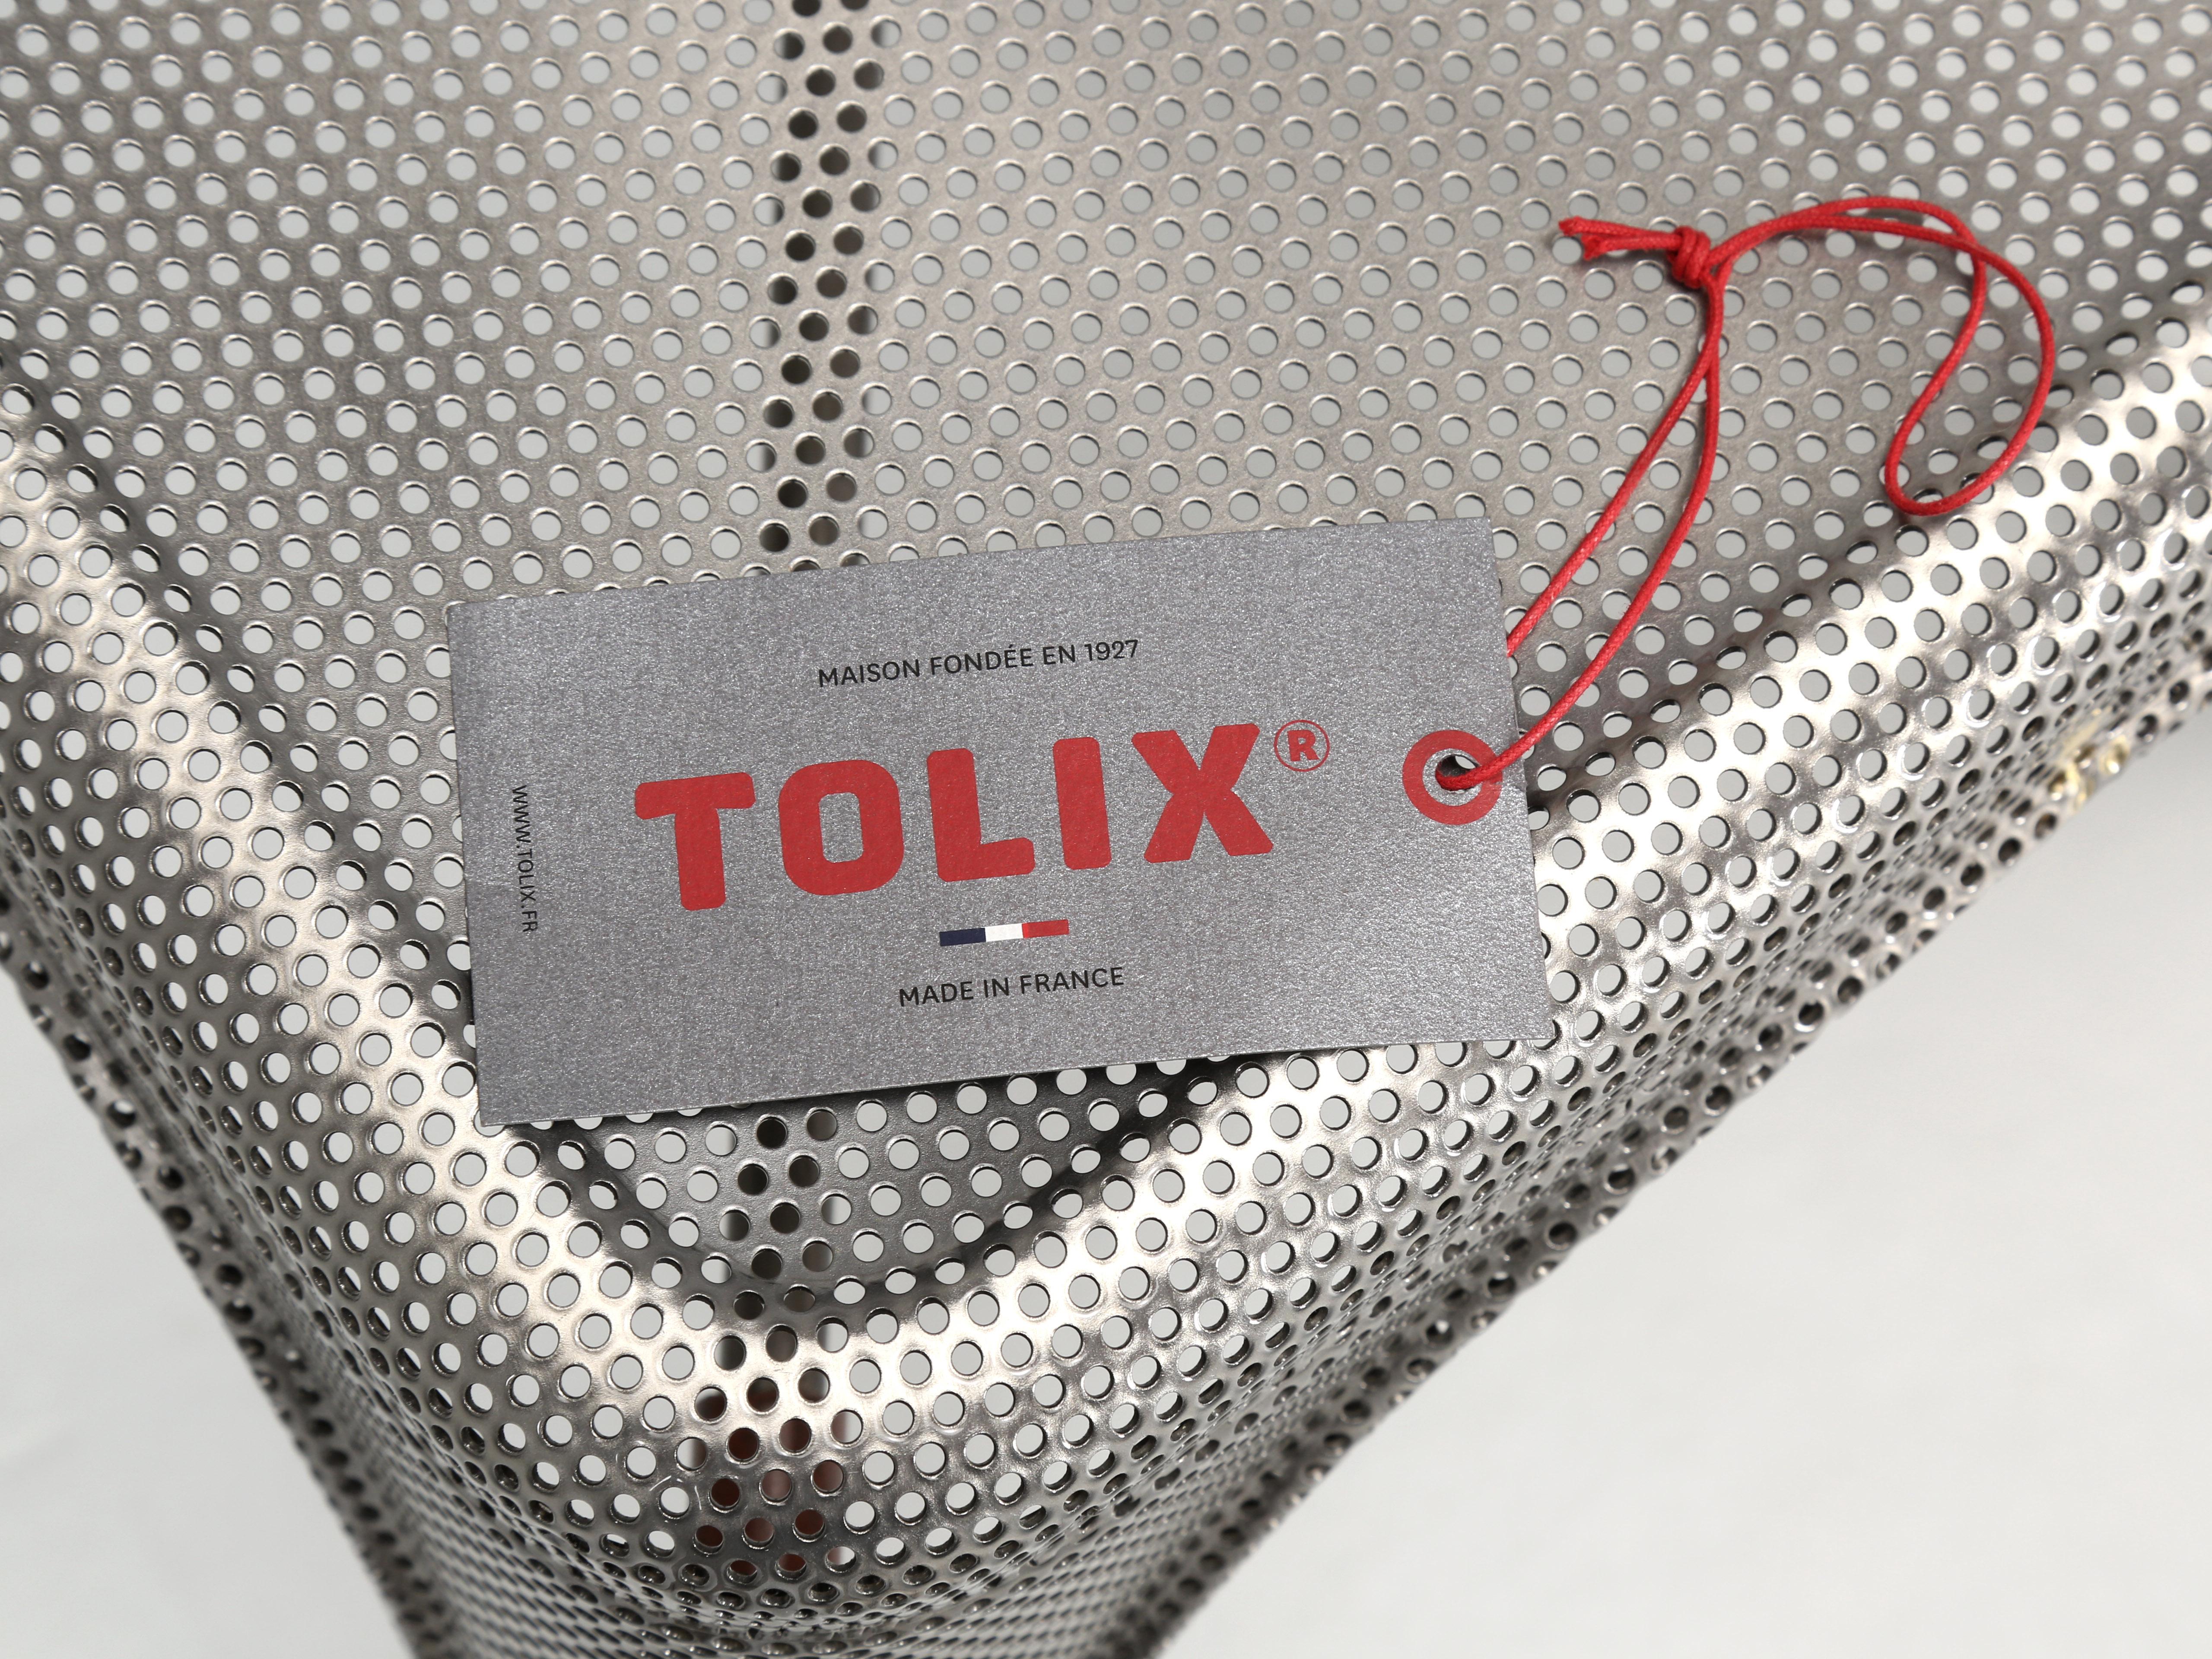 New Tolix Wire Mesh Chairs Set '4' Showroom Samples 1500 Tolix Pieces Available 7